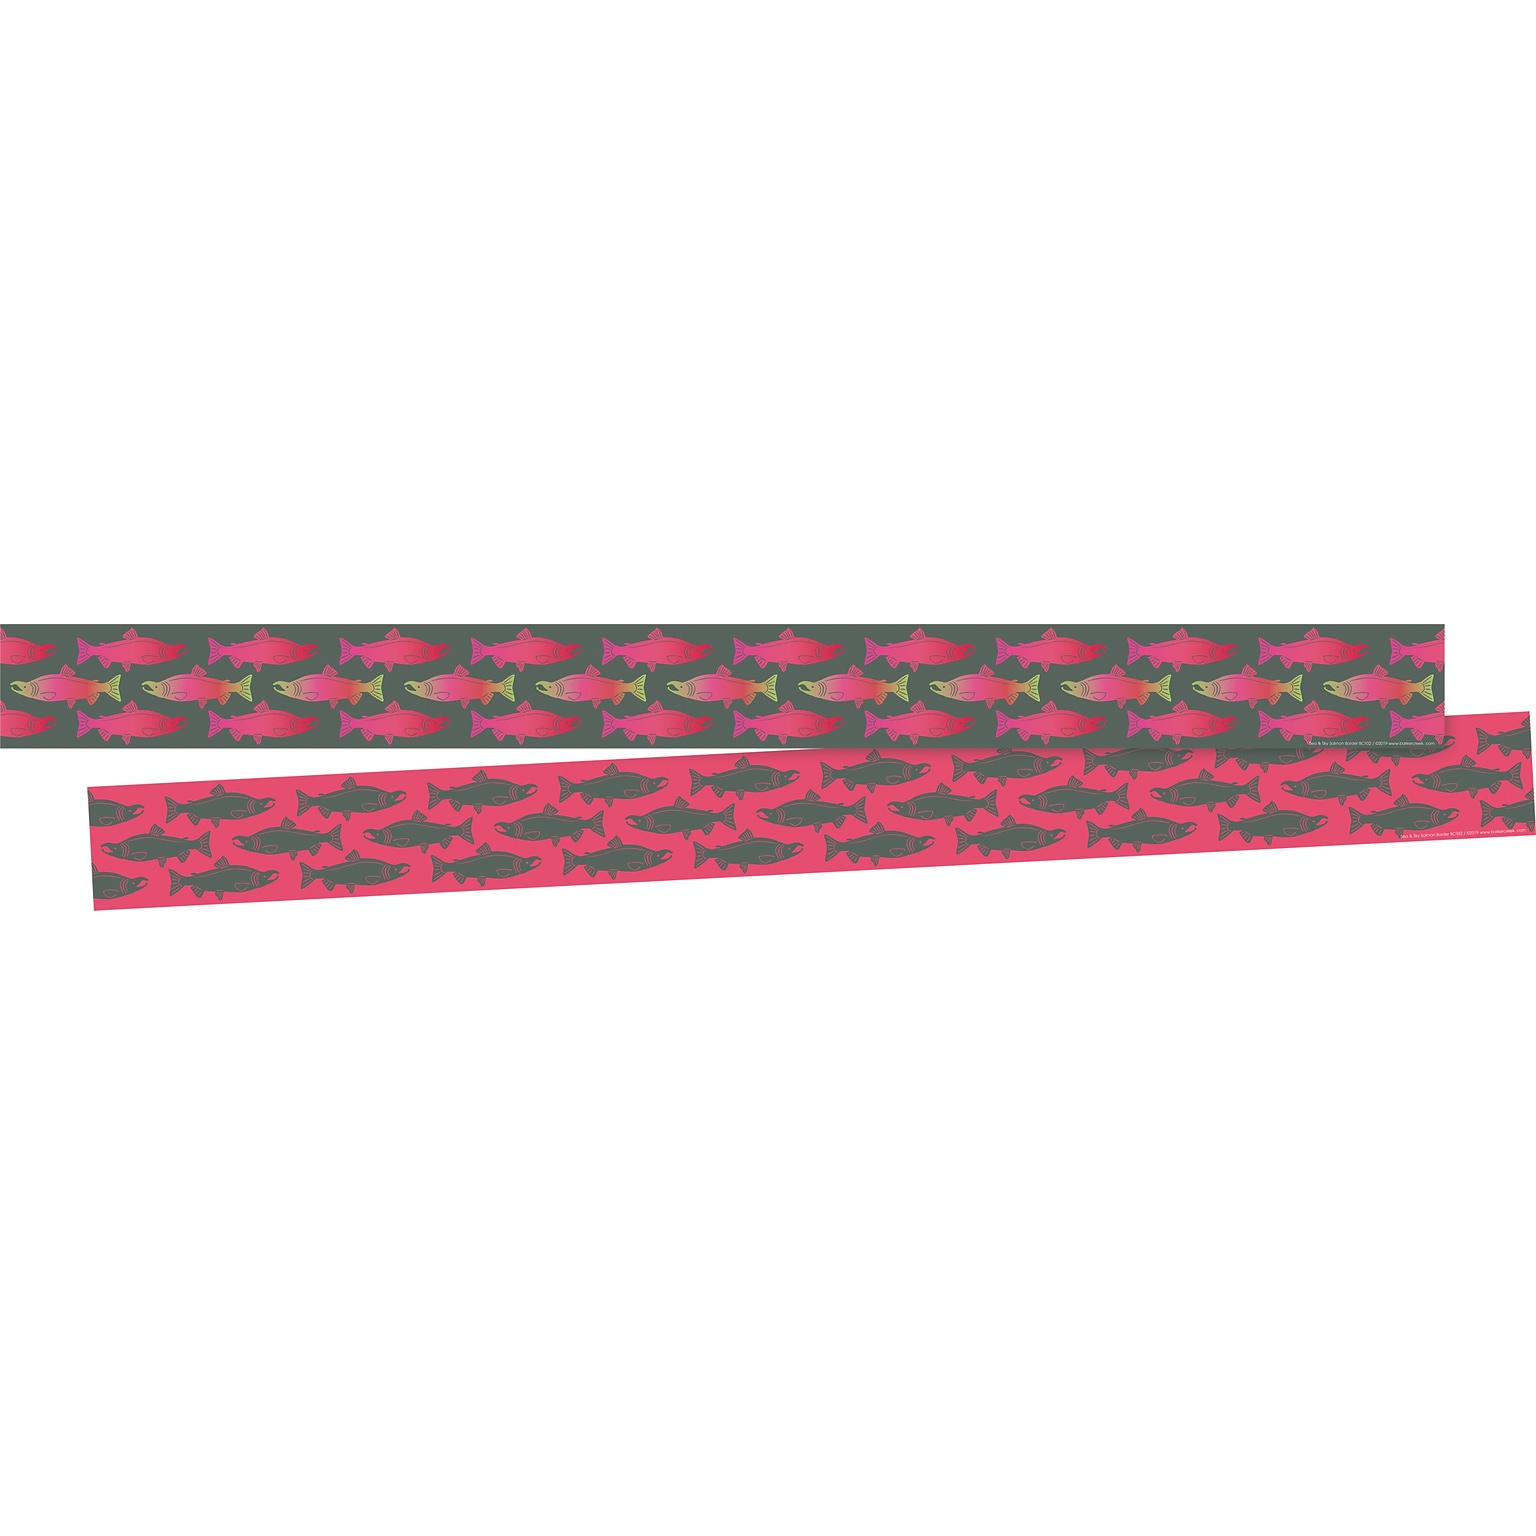 Barker Creek Salmon 35 x 3 Double-Sided Border, 24/Pack (BC4016)